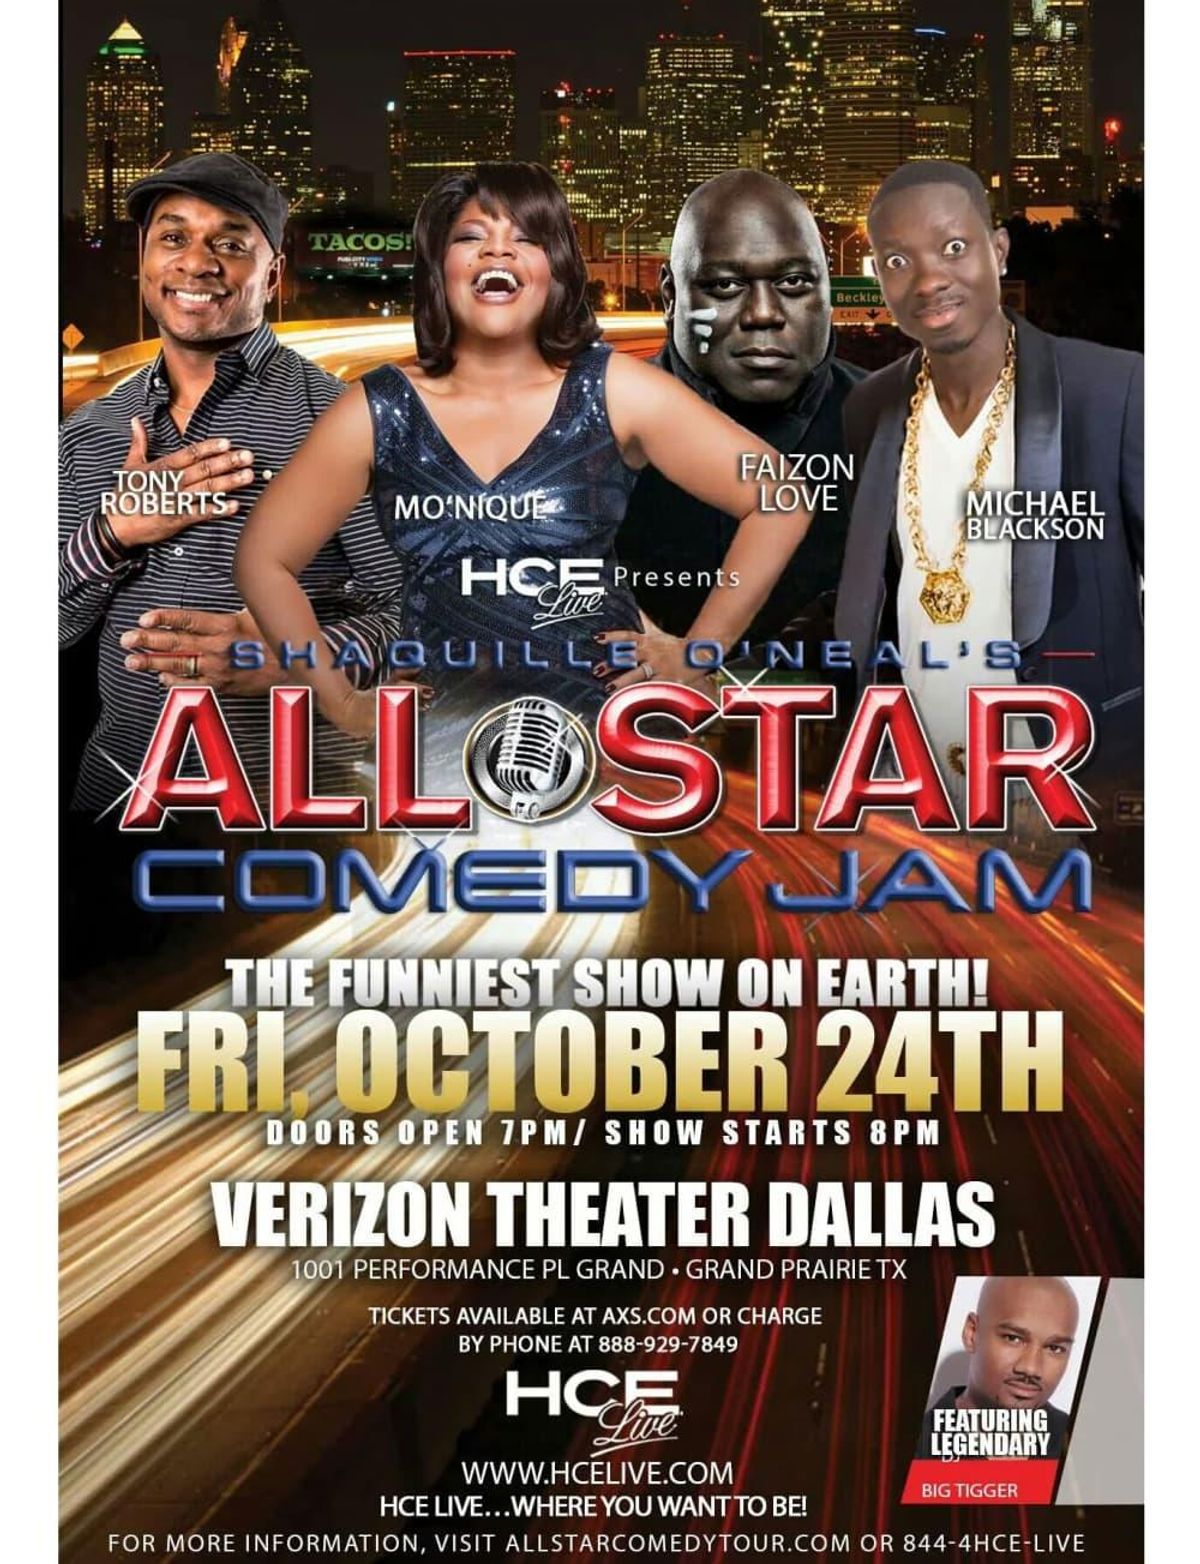 Shaquille O'Neal's All Star Comedy Jam with Mo'Nique, Tony Roberts ...